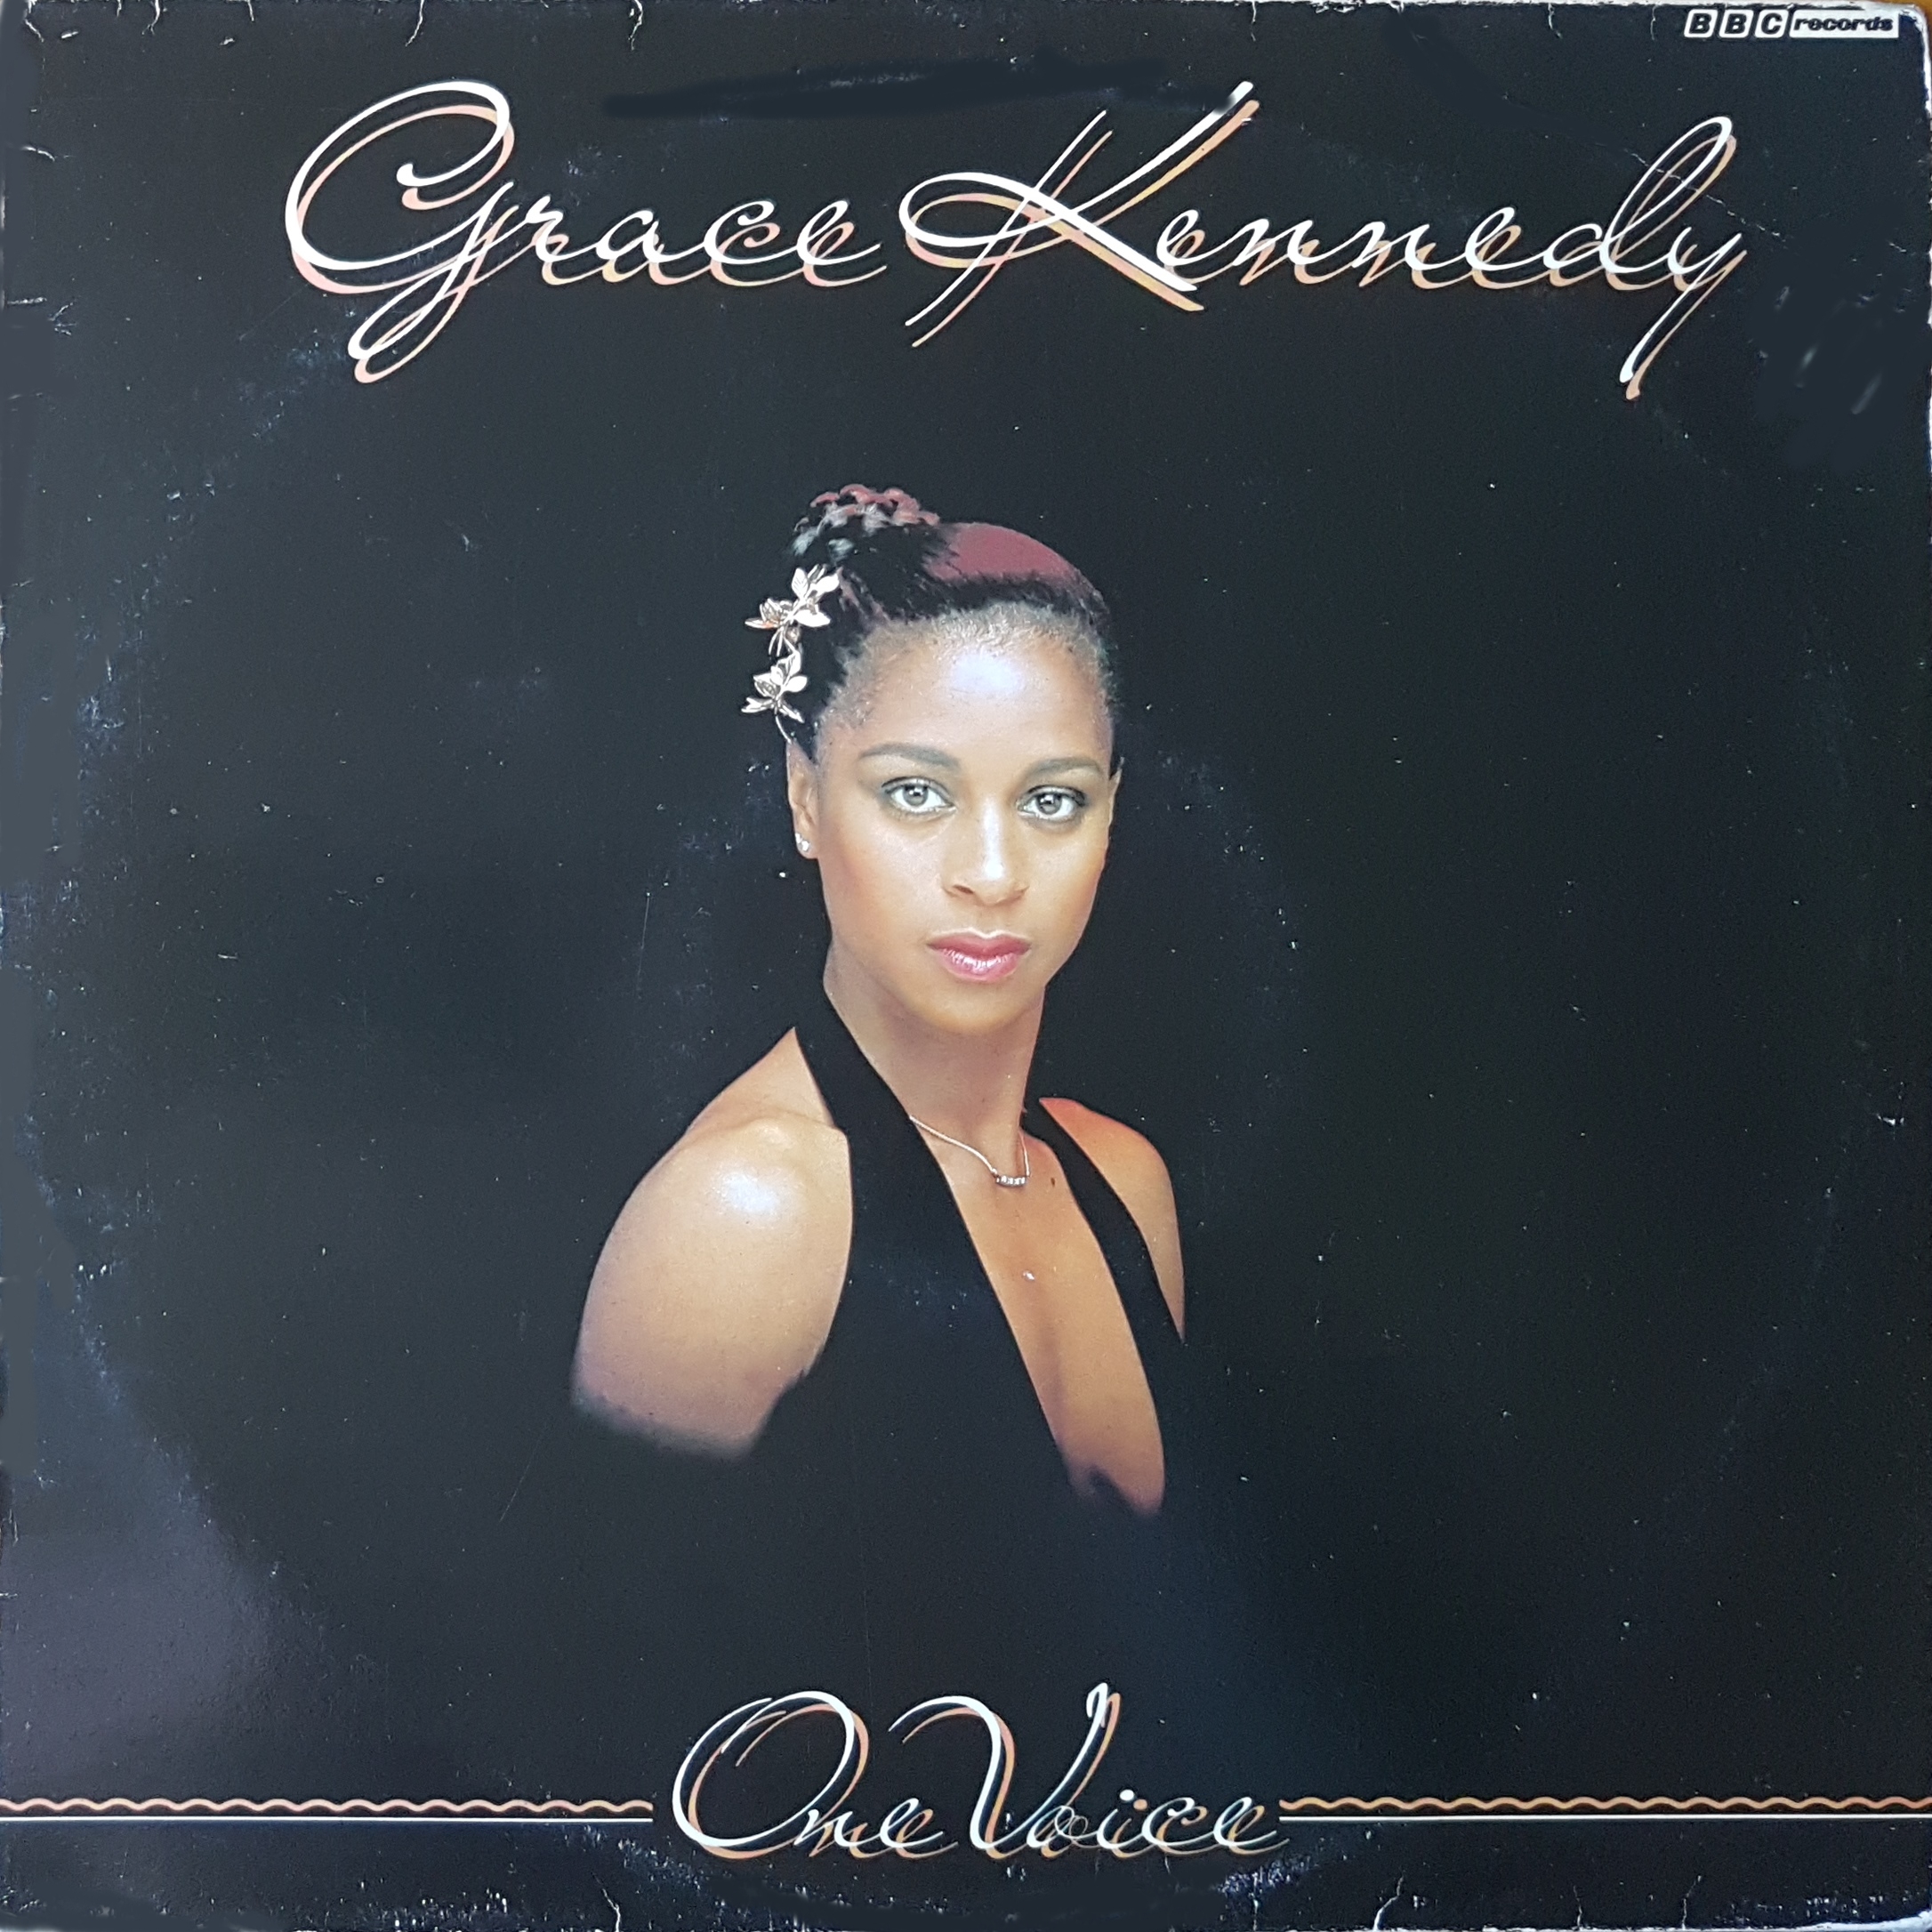 Picture of REB 419 One voice - Grace Kennedy by artist Grace Kennedy from the BBC albums - Records and Tapes library